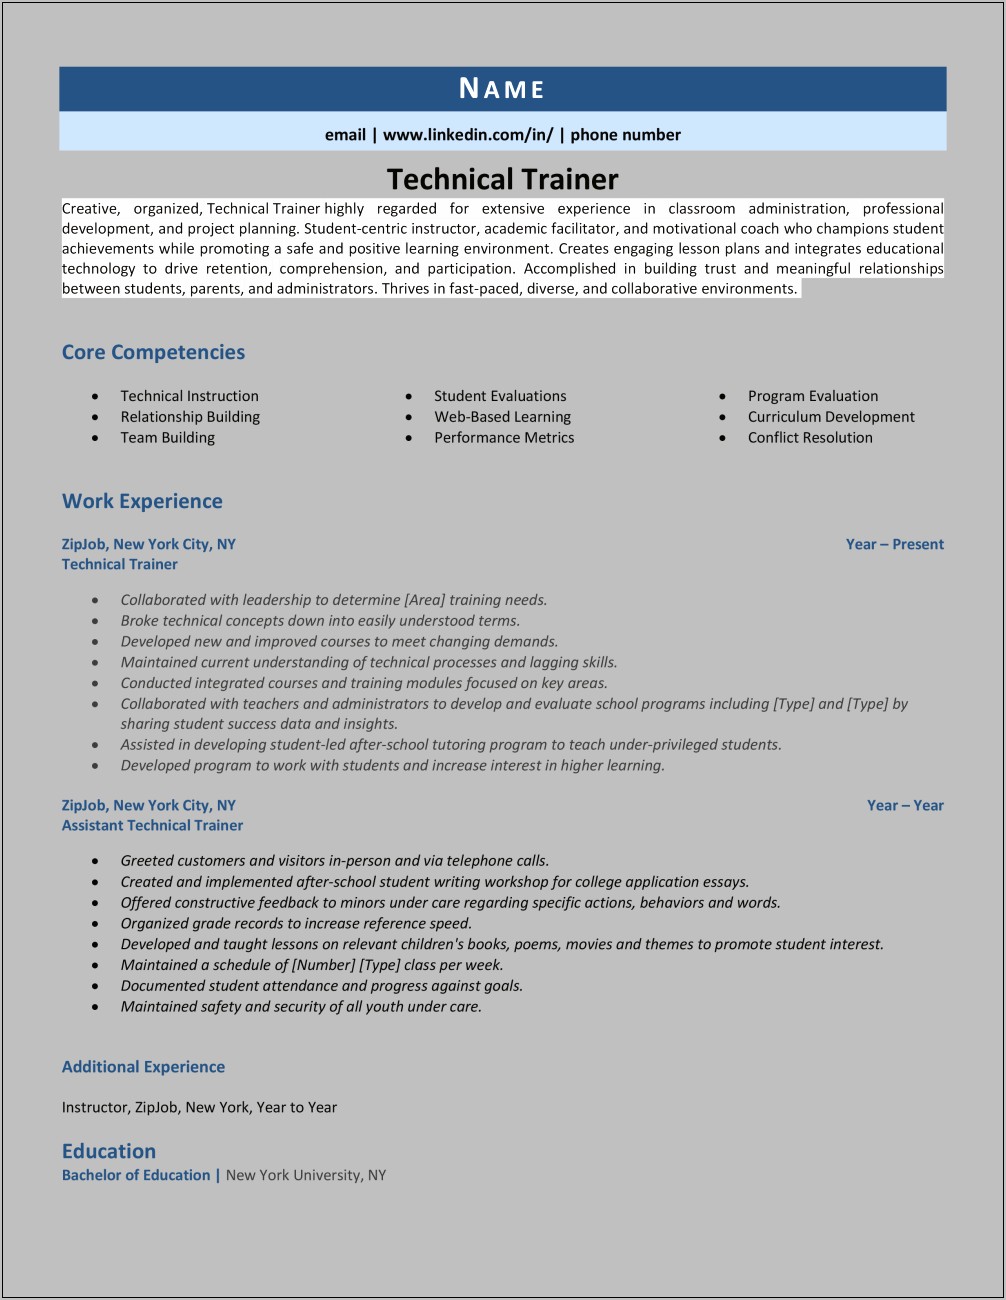 Sample Resume Summary Statement For Technical Trainer